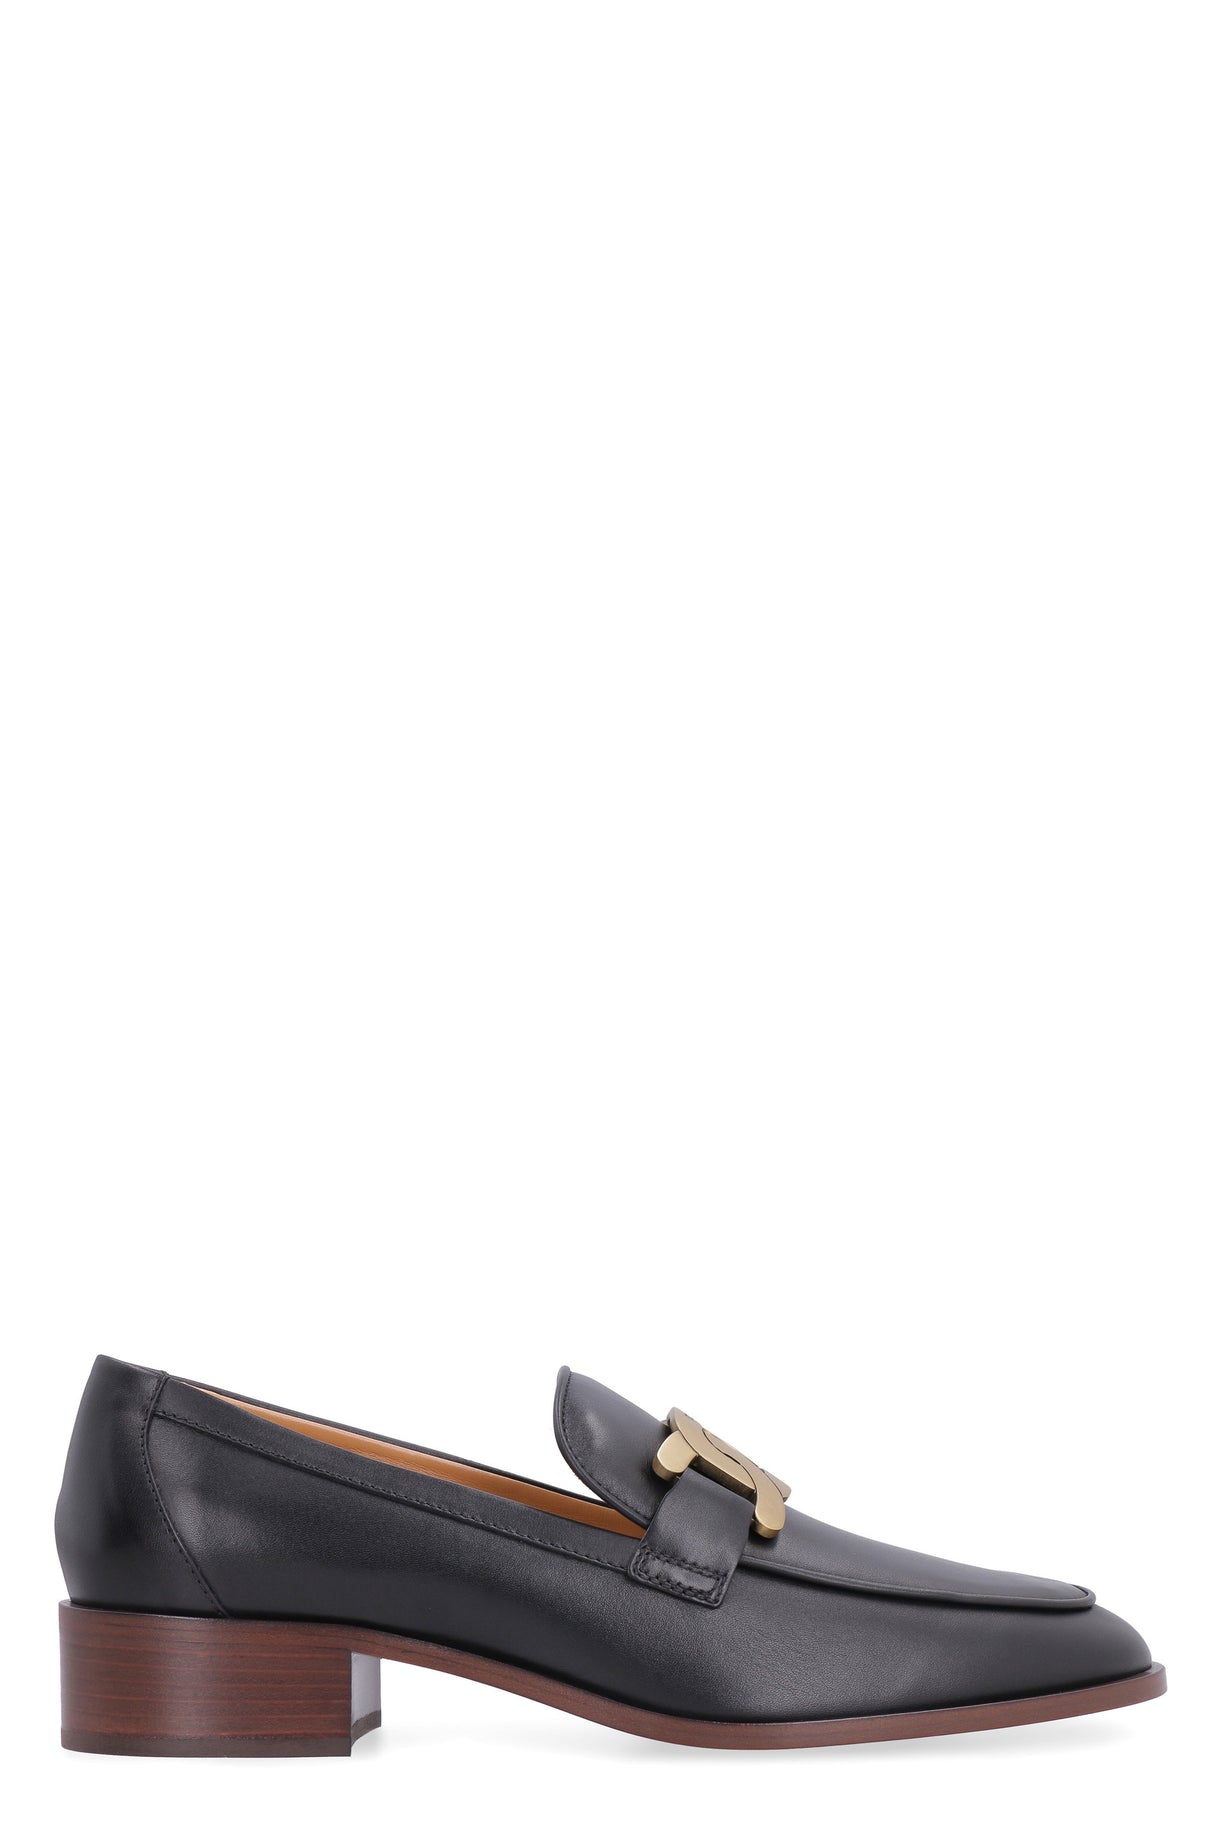 TOD'S Black Leather Moccasins for Women